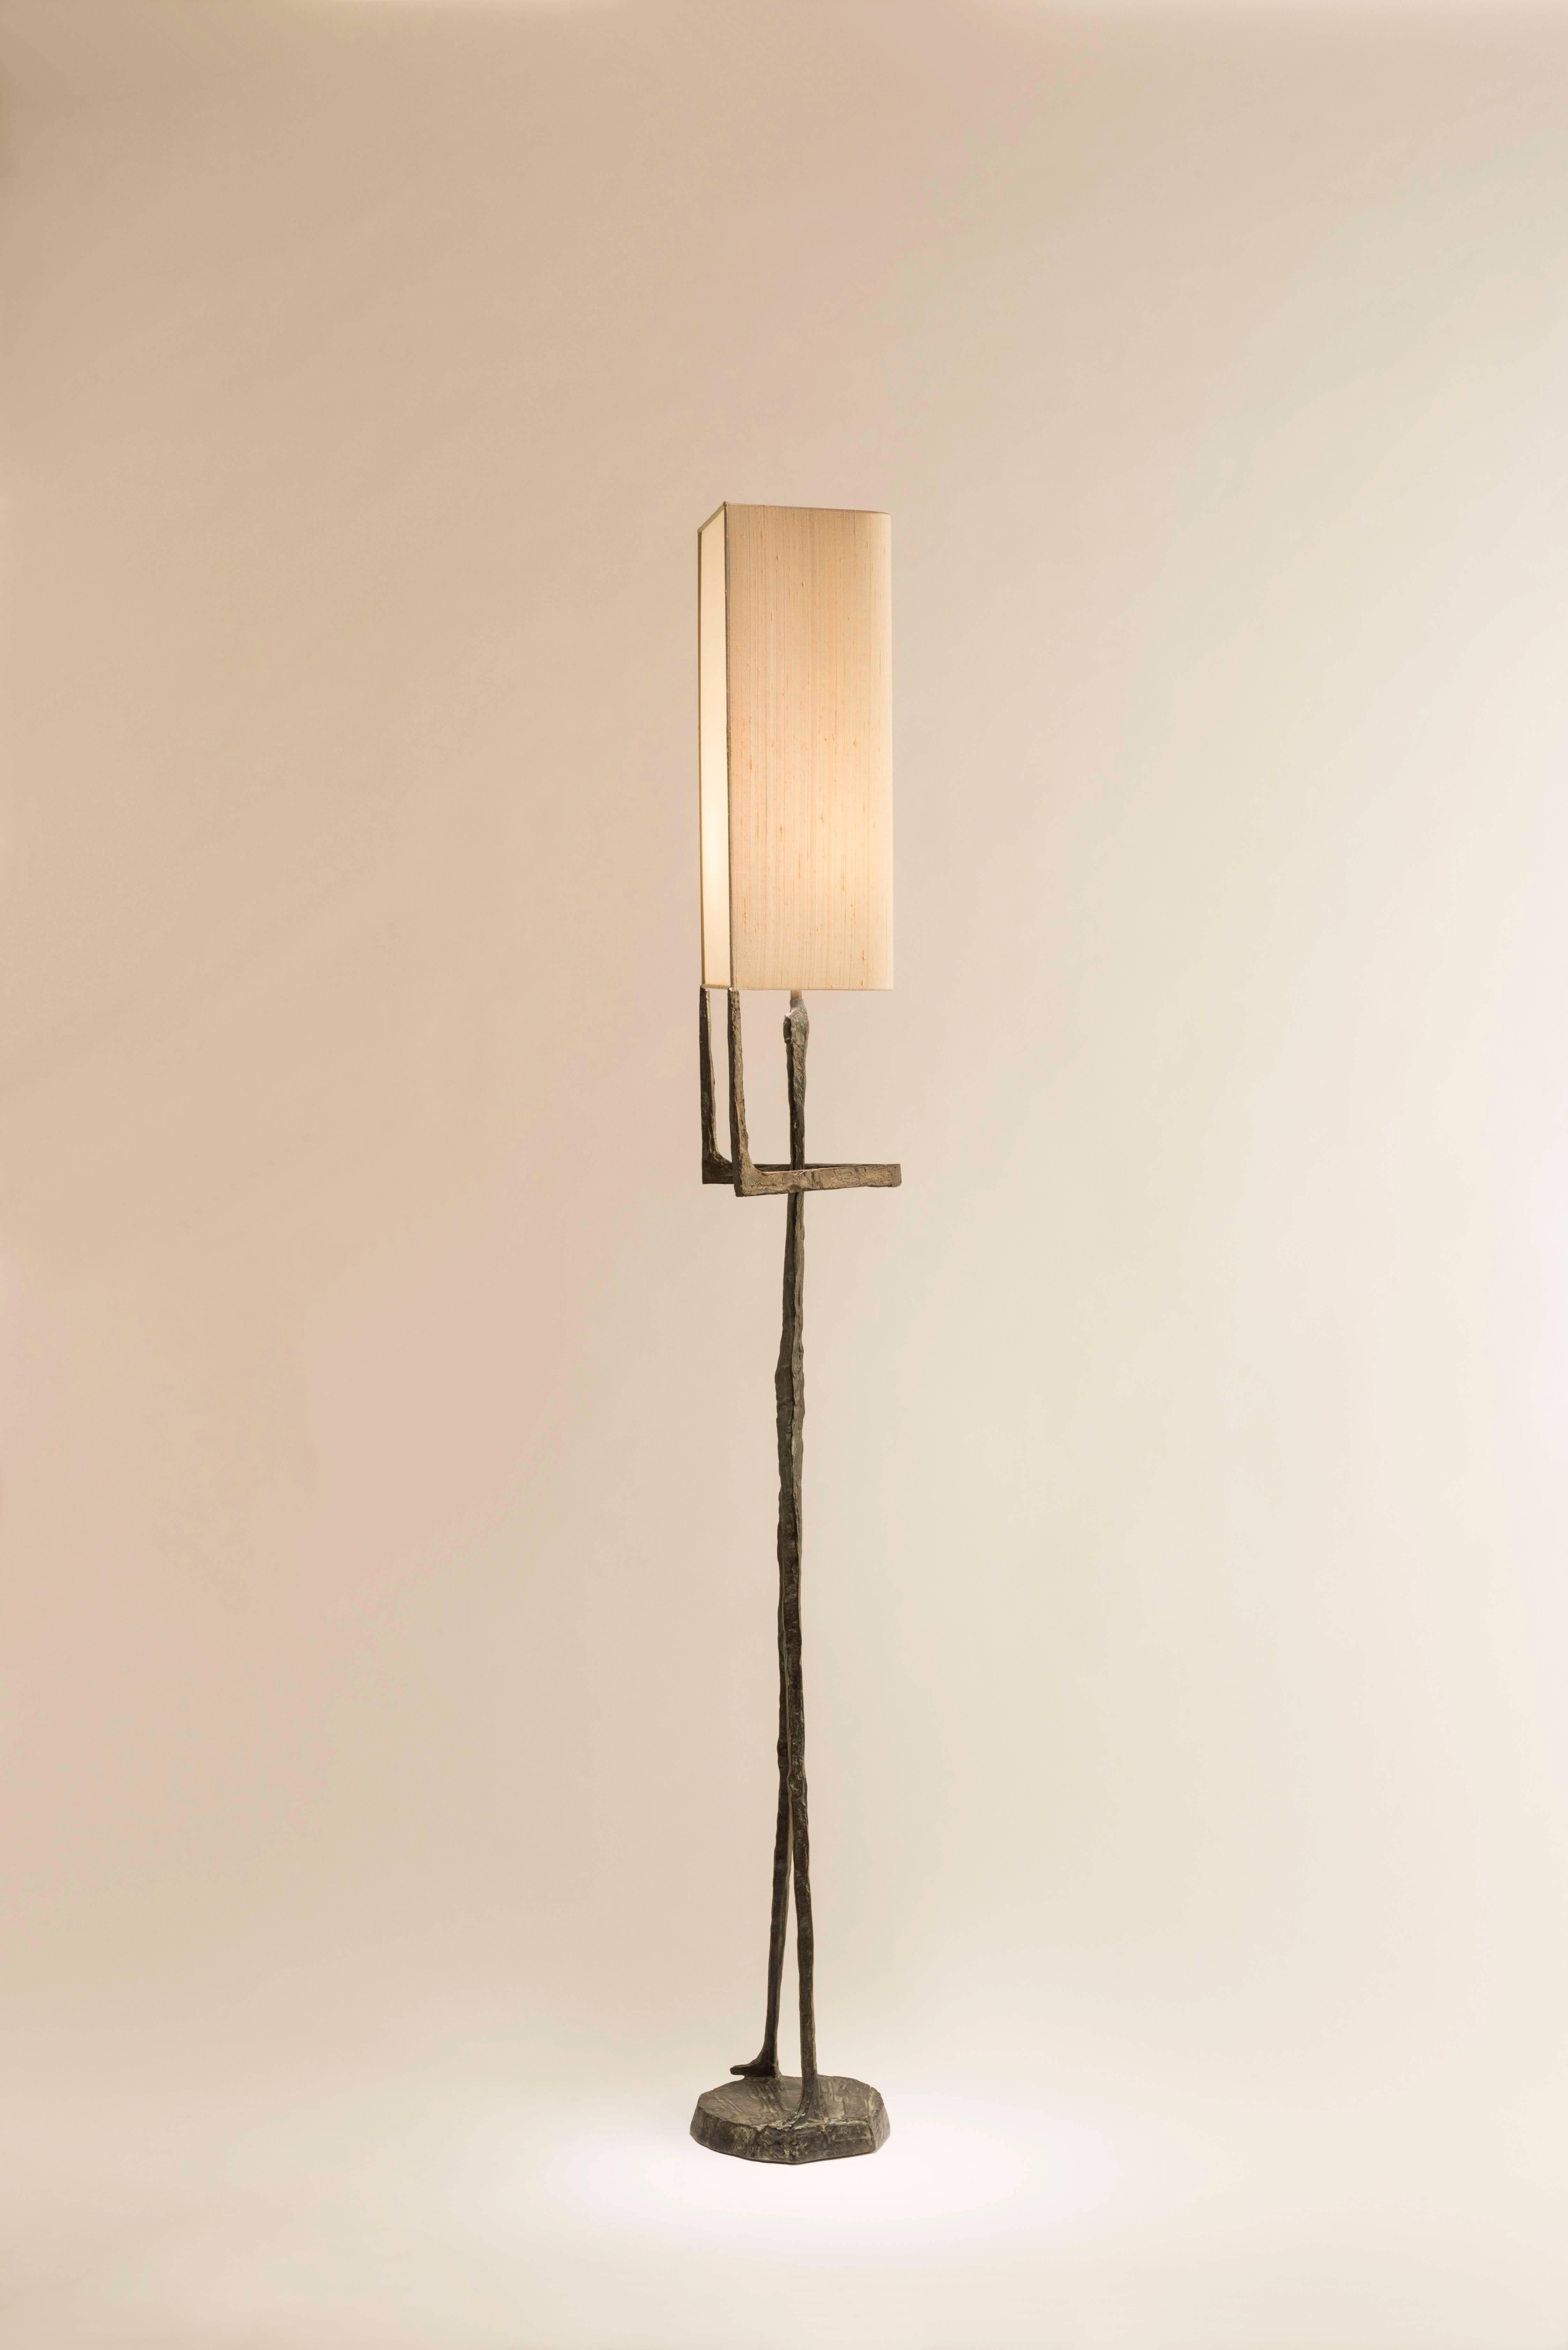 Echassier floor lamp, with a double fabric shade
Signed FELIX AGOSITINI and numbered
Manufactured by Charles Paris
Engraved 